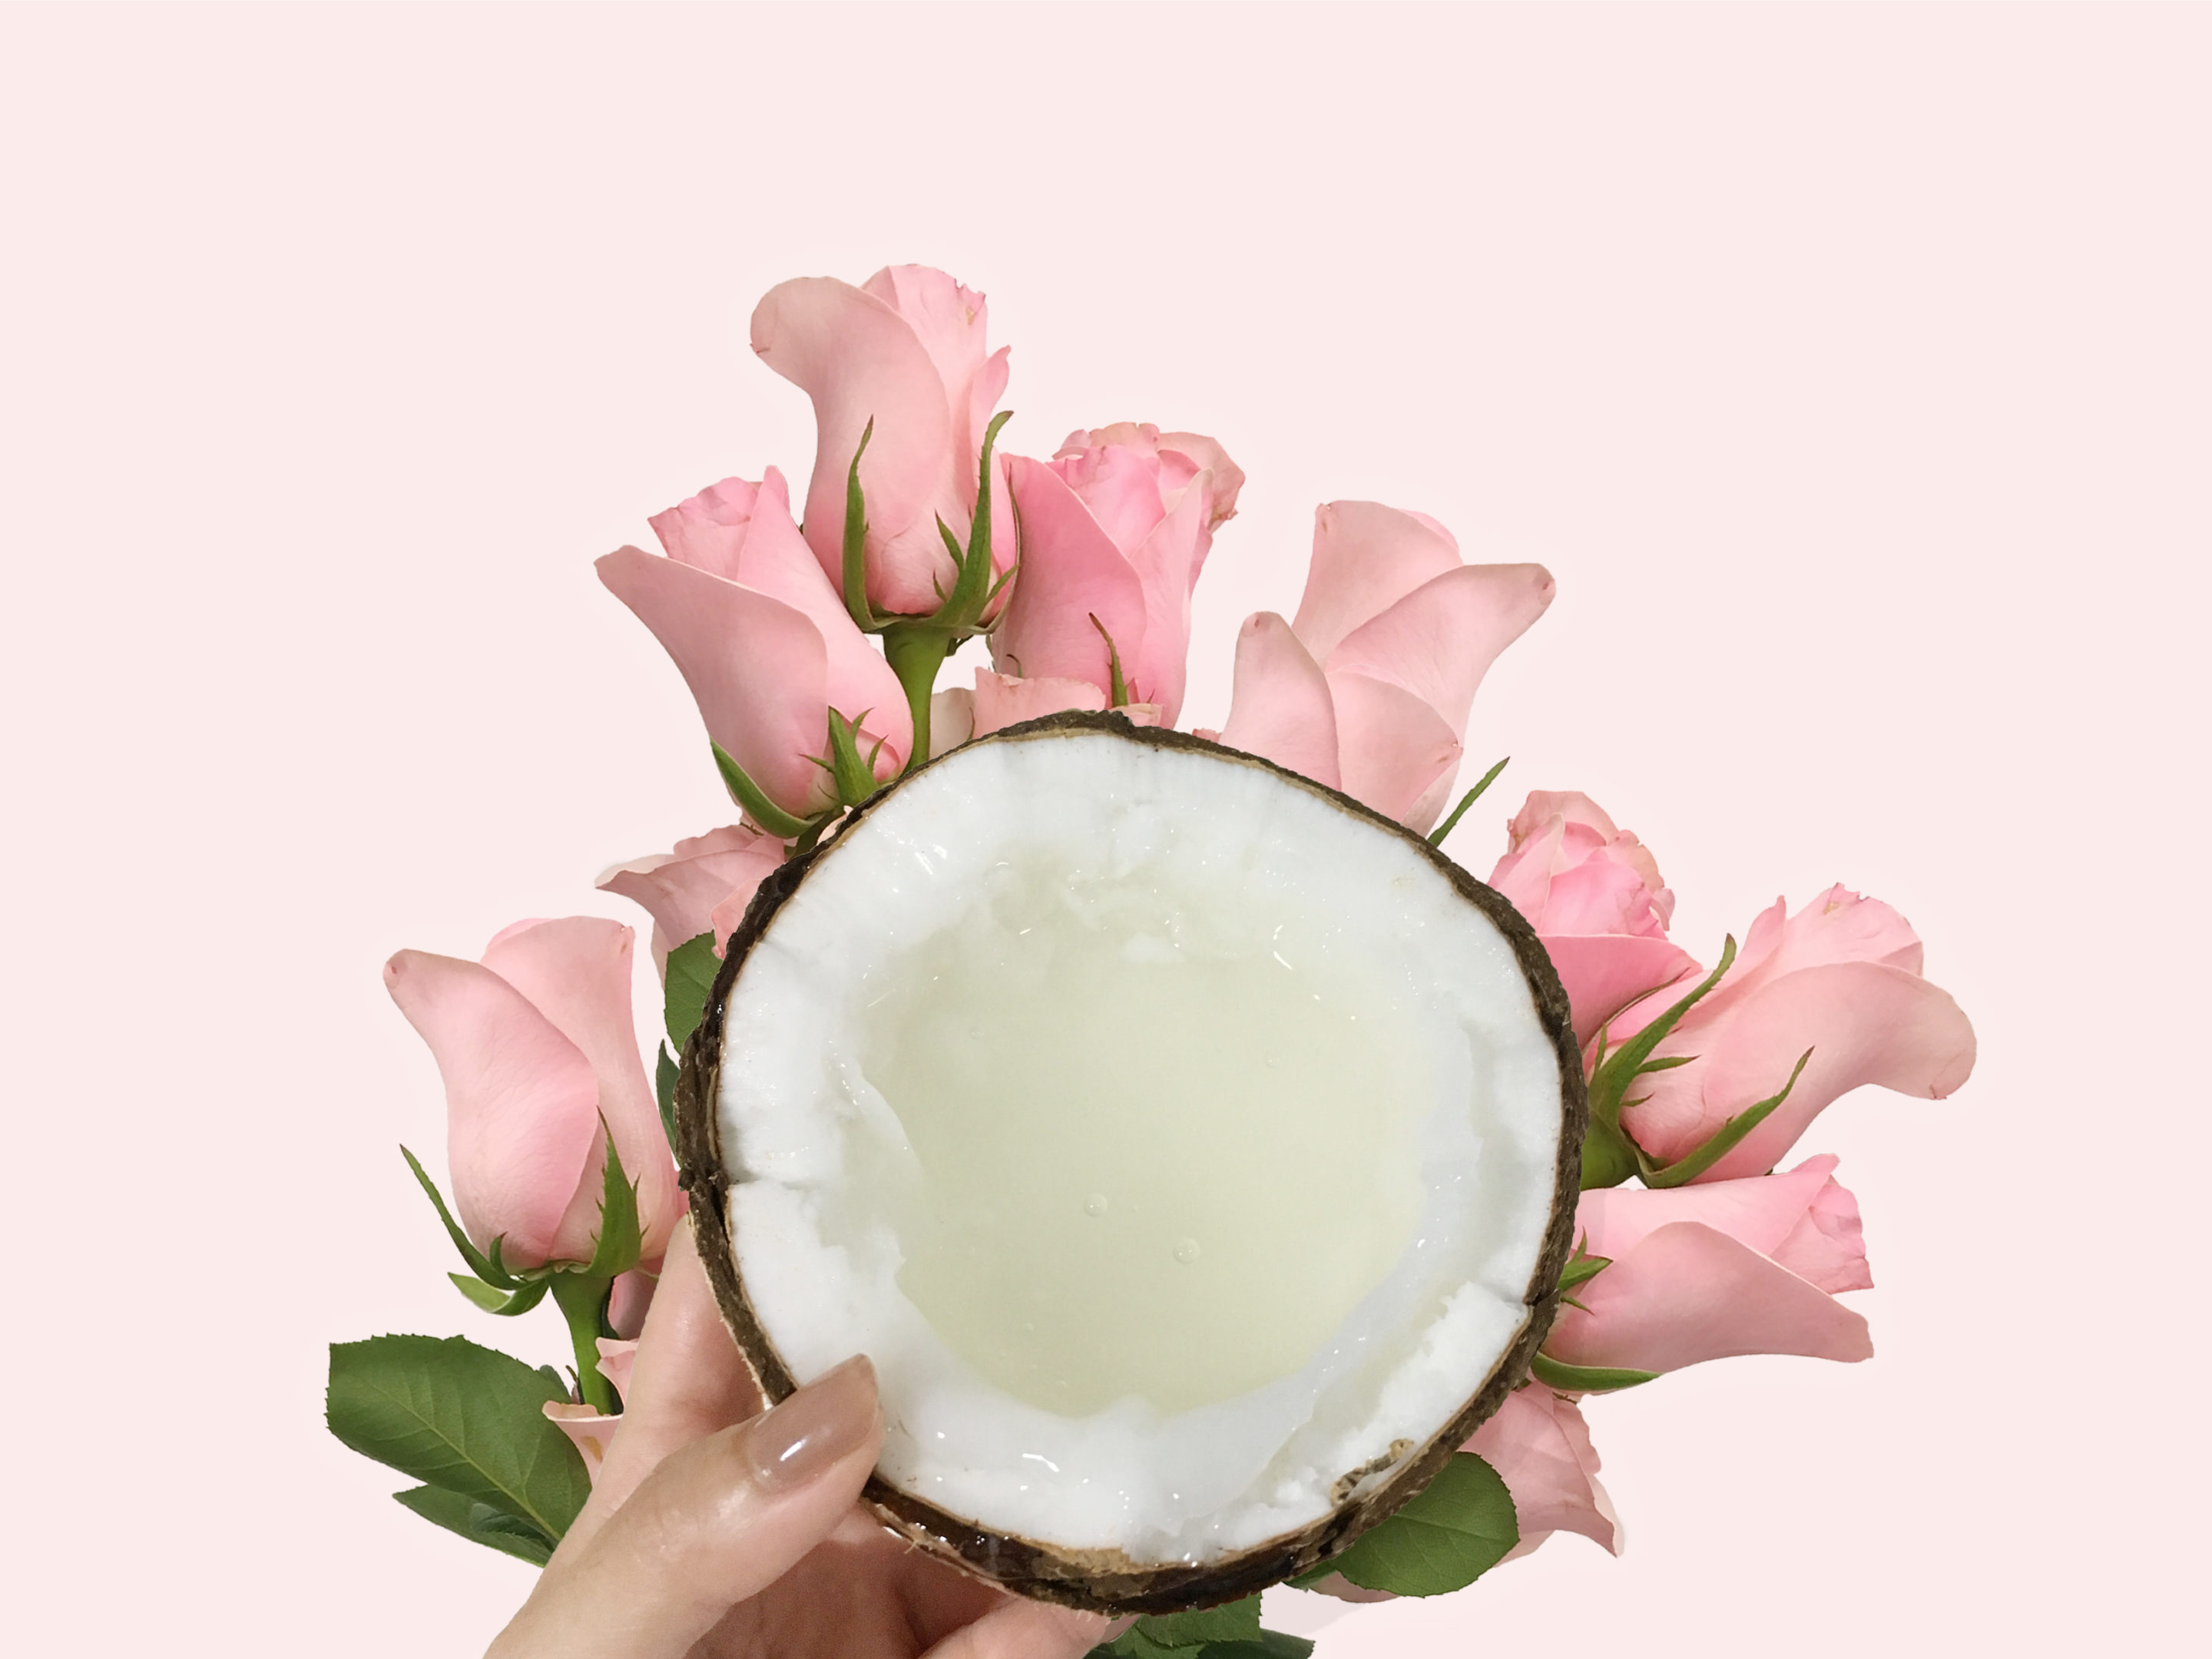 Coconut Oil, The New Fad or Fact?